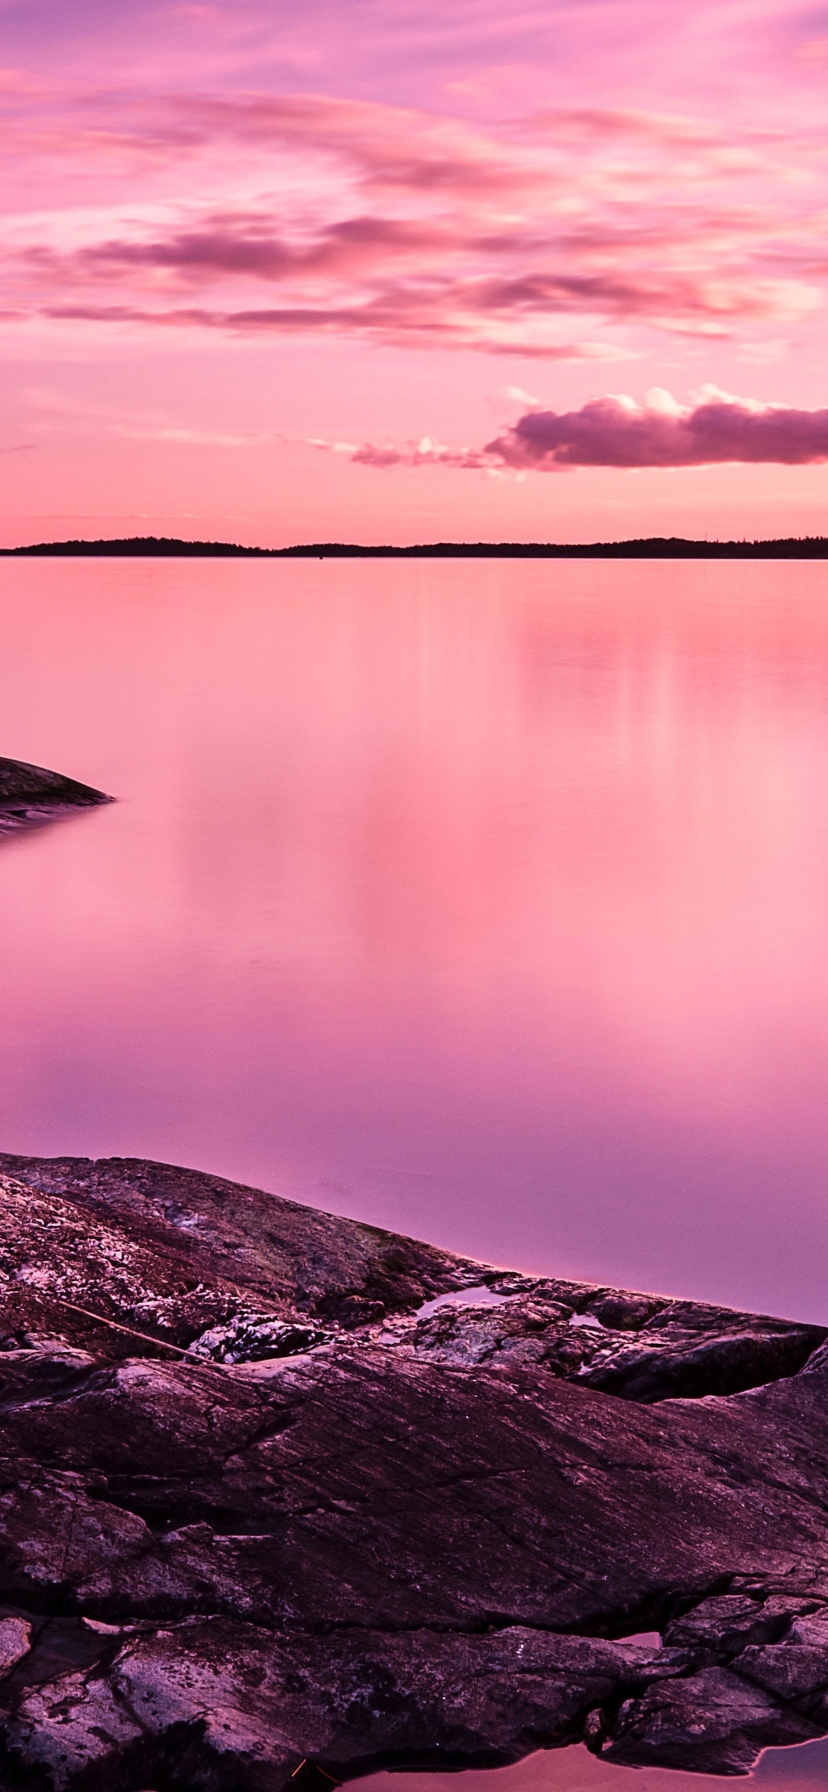 828x1792 Pink Lake 8k 828x1792 Resolution Wallpaper Hd Nature 4k Wallpapers Images Photos And Background Wallpapers Den